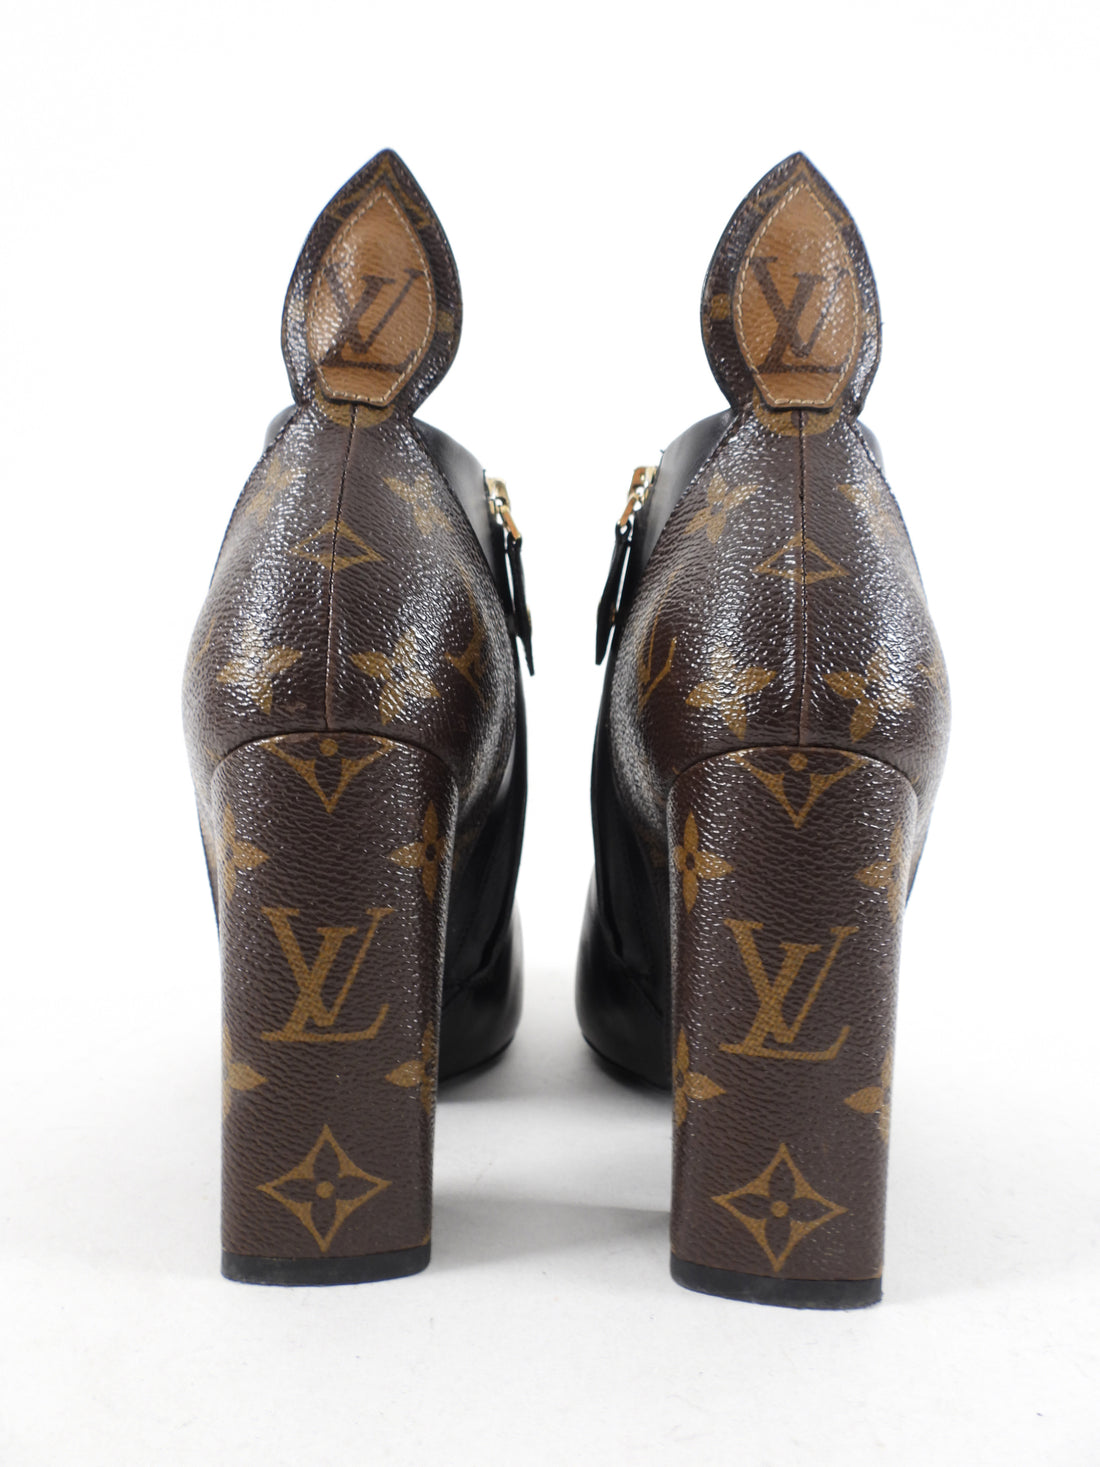 Louis Vuitton - Authenticated Heel - Patent Leather Brown for Women, Very Good Condition